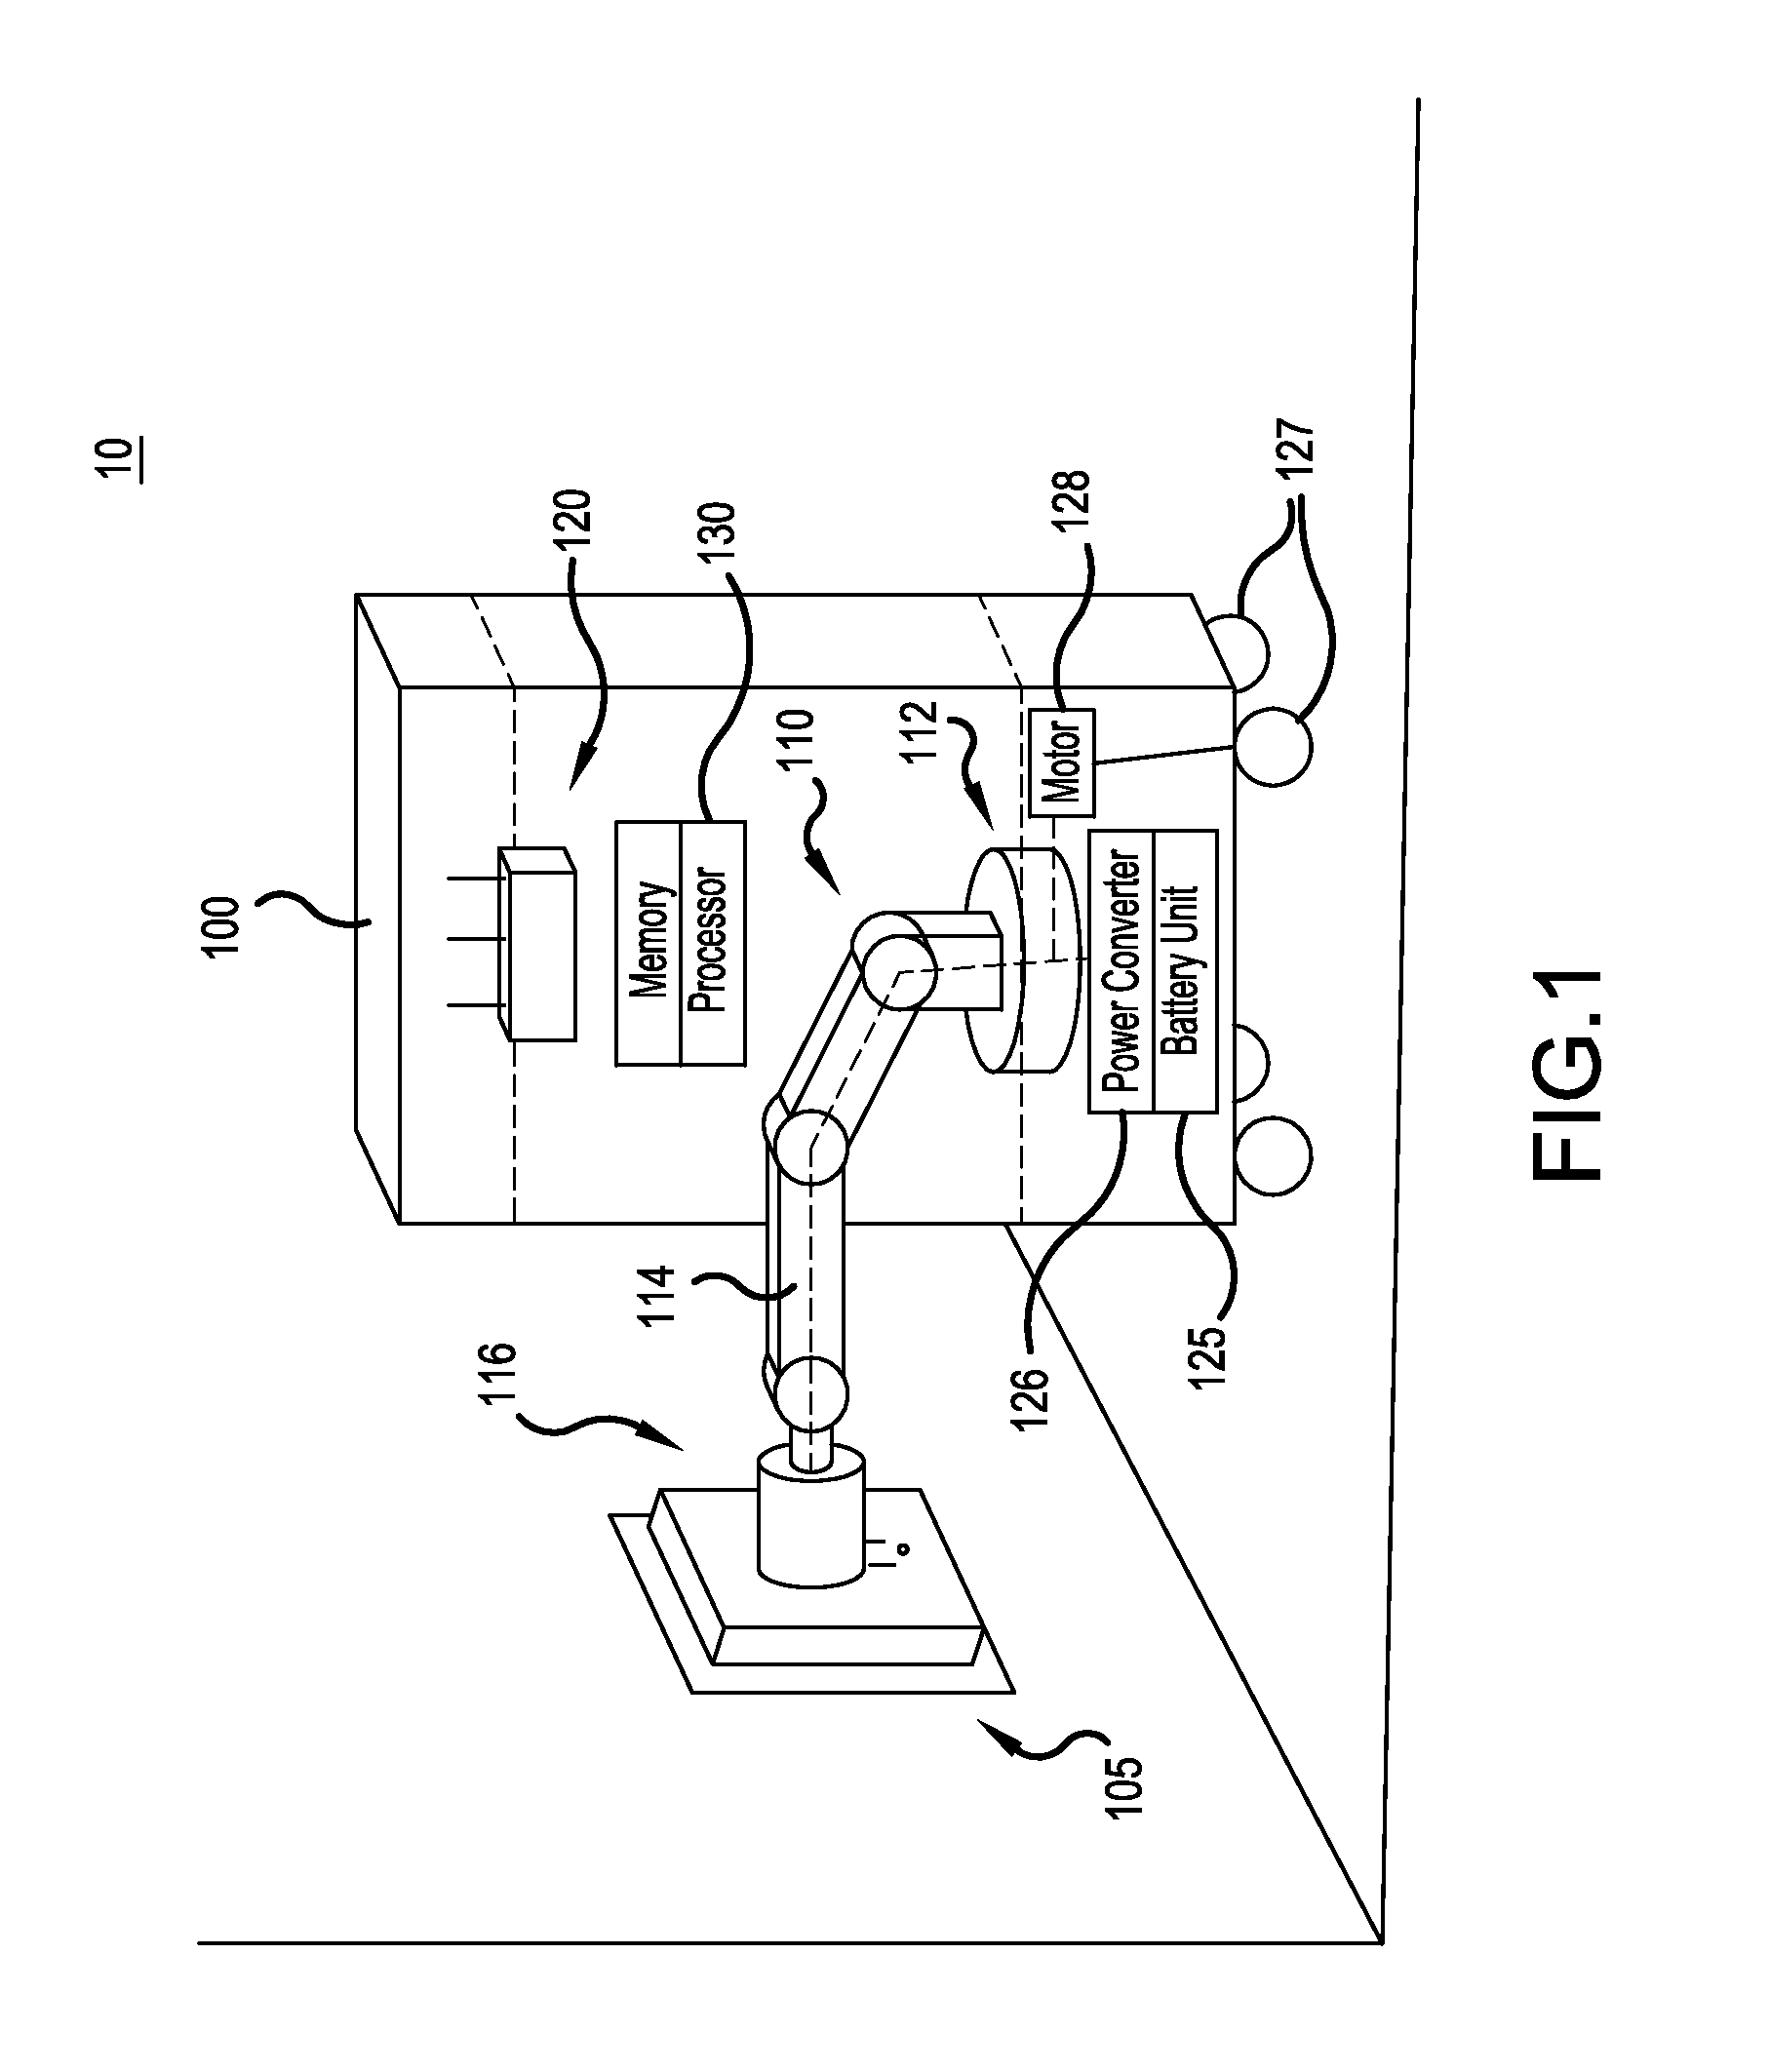 Apparatus and method for providing tethered electrical power to autonomous mobile robots